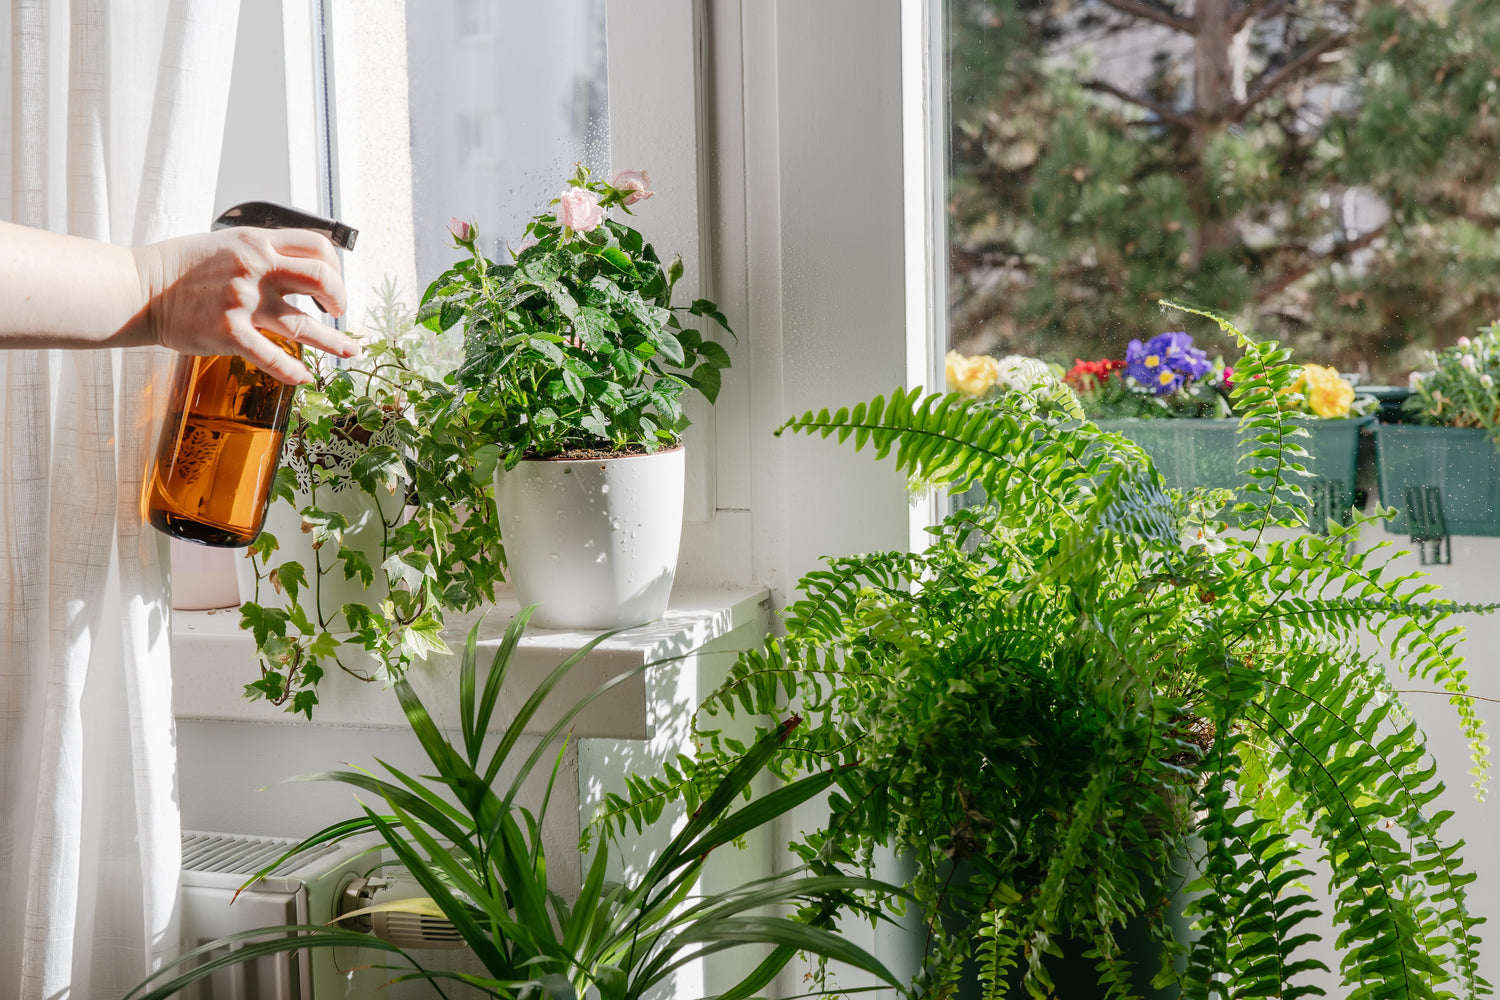 Top 10 Winter Care Tips for Thriving House Plants